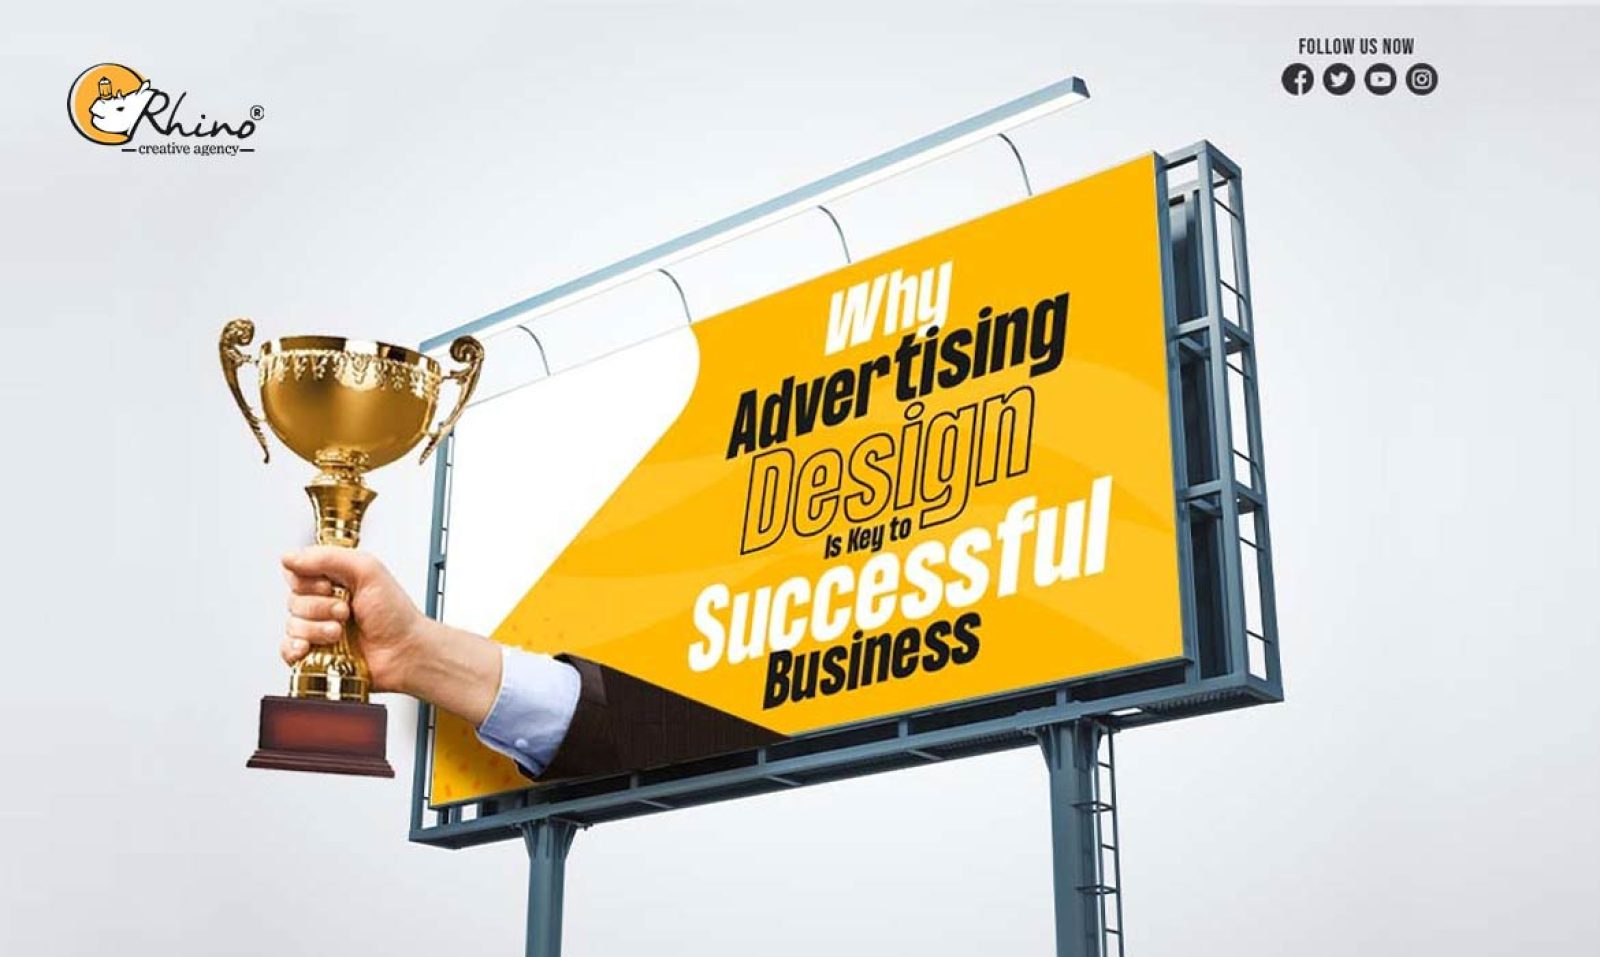 Why Advertising Design Is Key to Success full Business